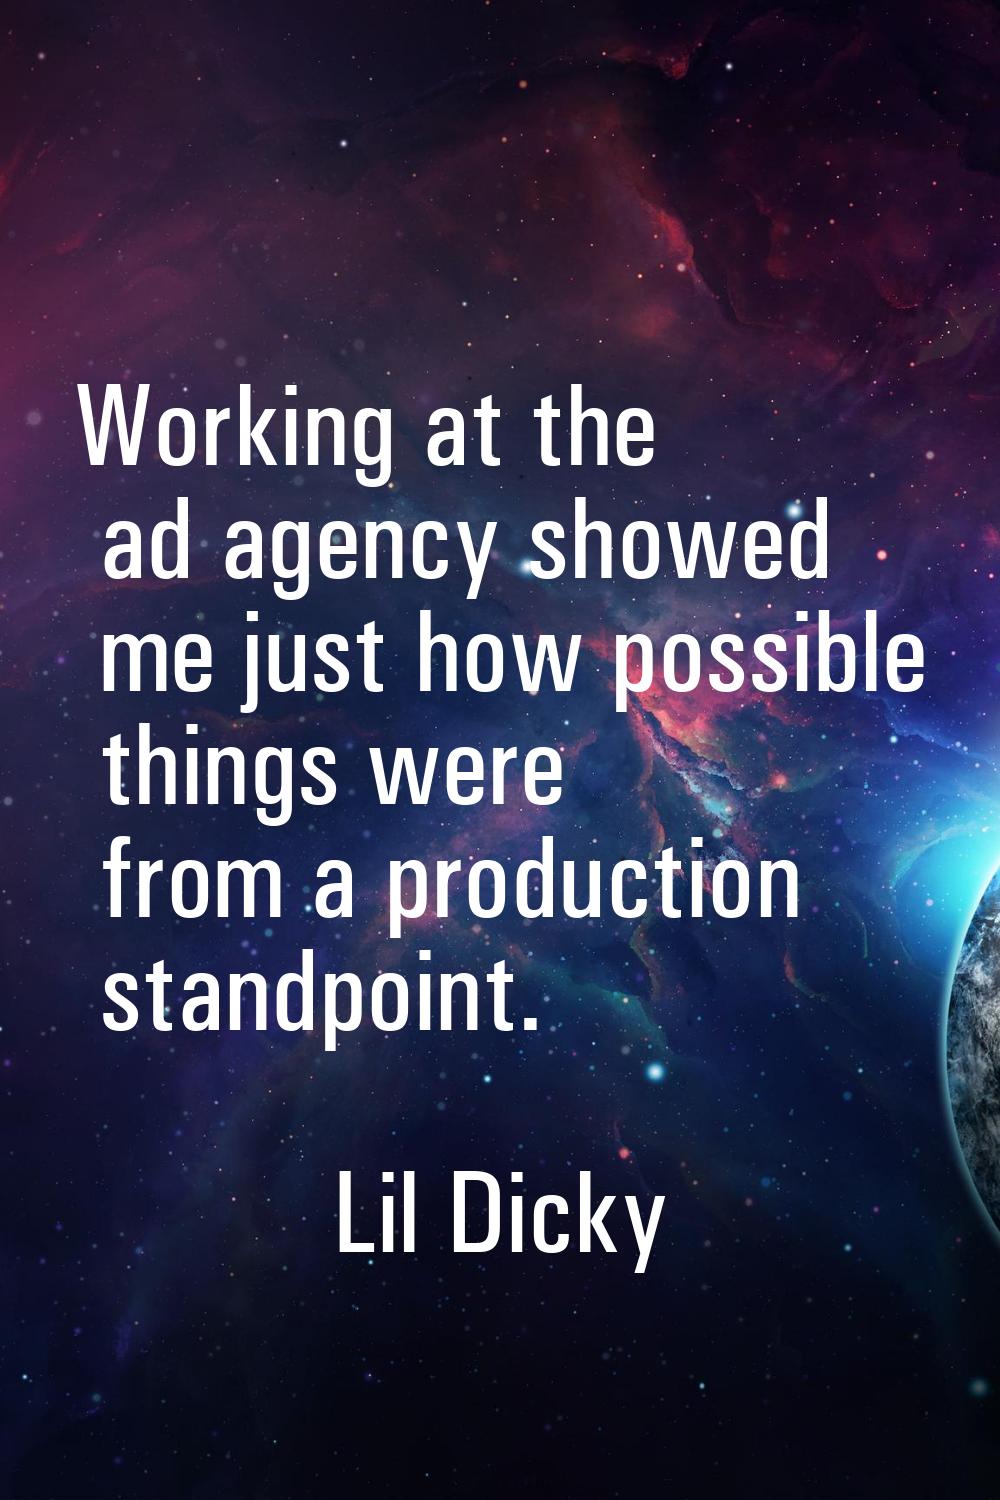 Working at the ad agency showed me just how possible things were from a production standpoint.